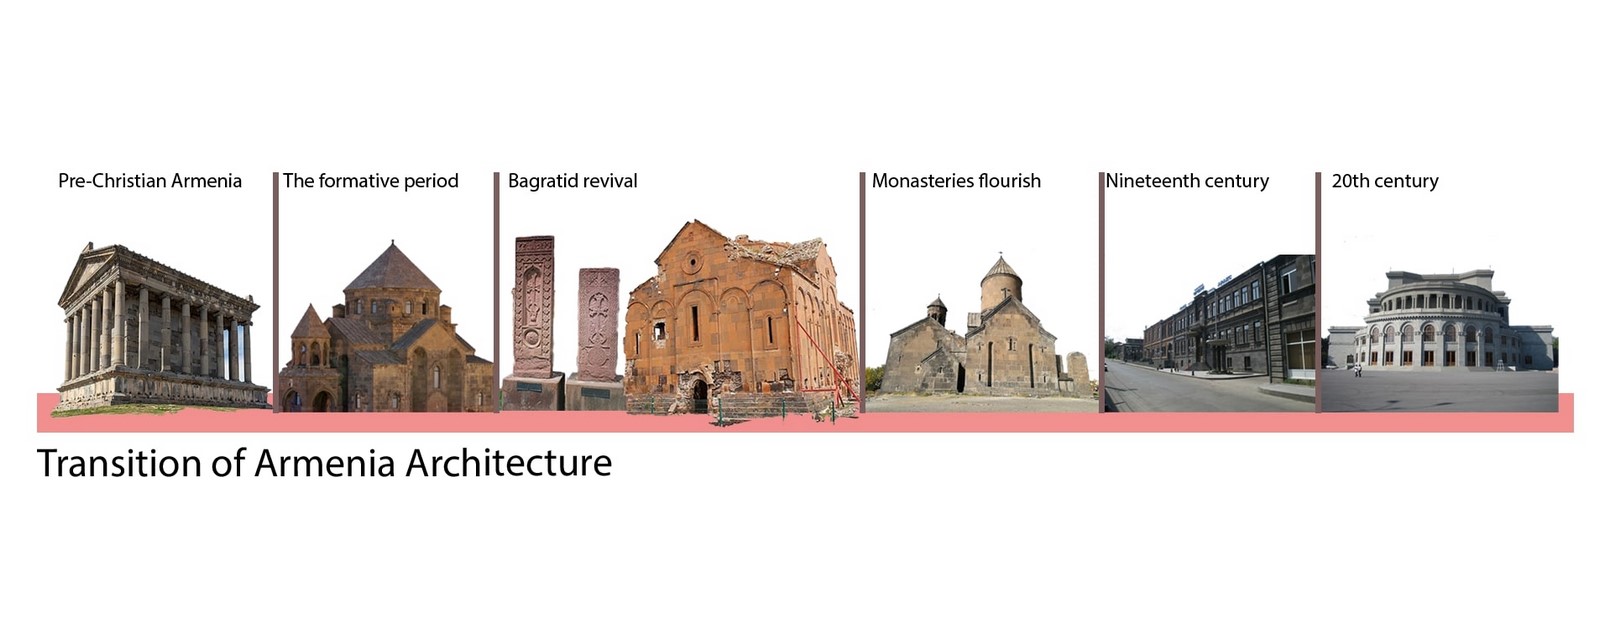 Past, Present and Future Architecture of Armenia - Sheet1